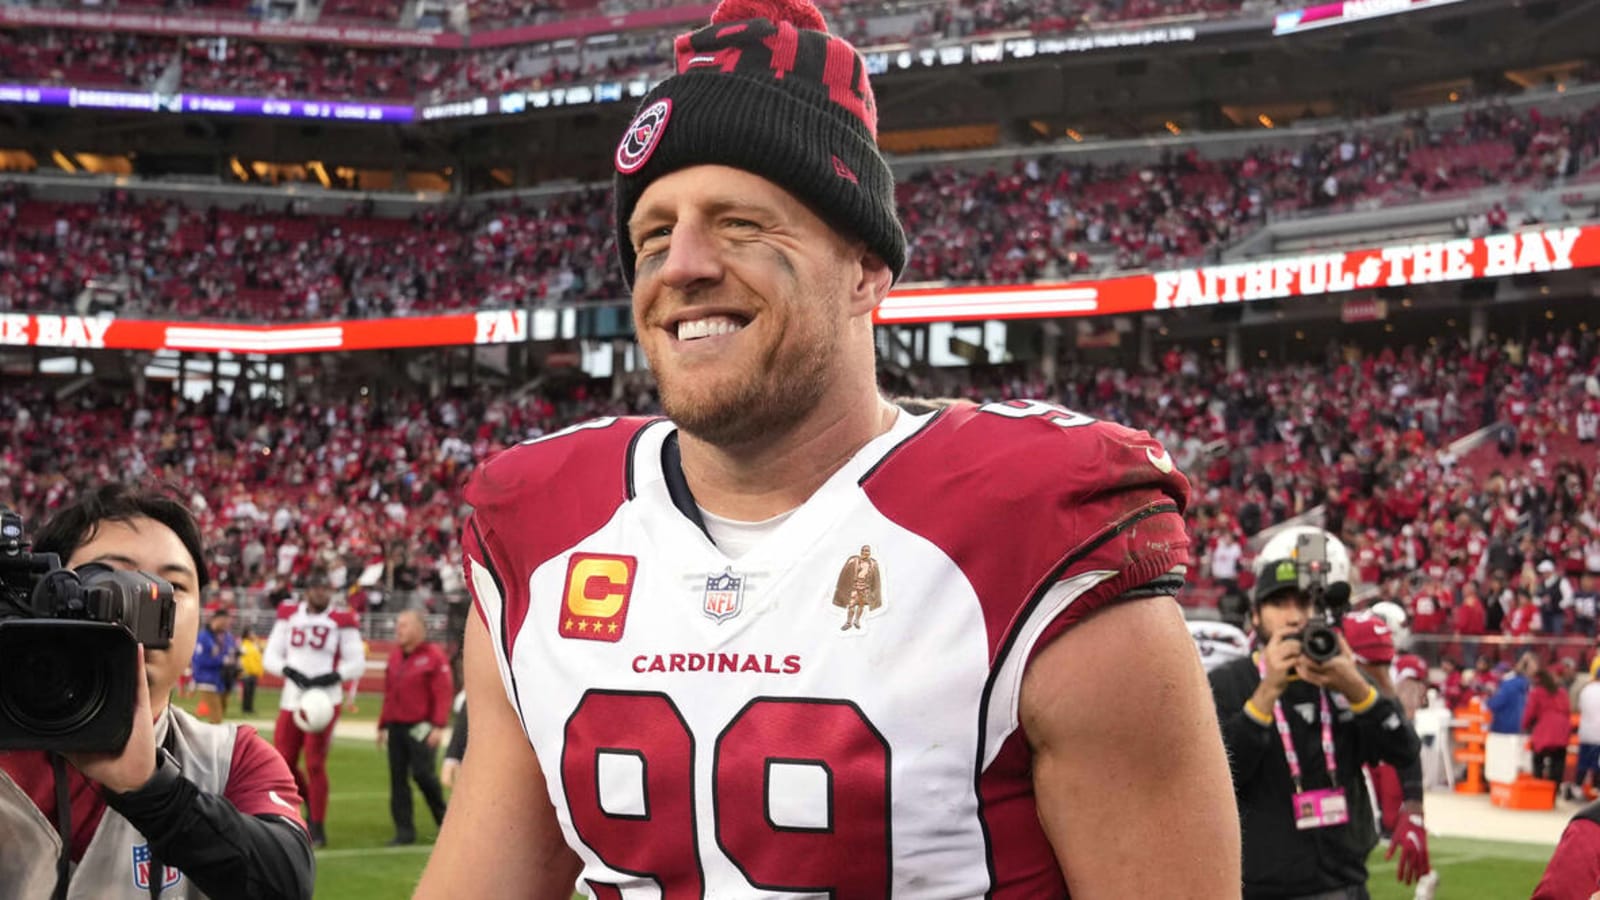 Watt reveals why he won’t sign one-day contract to retire with Texans